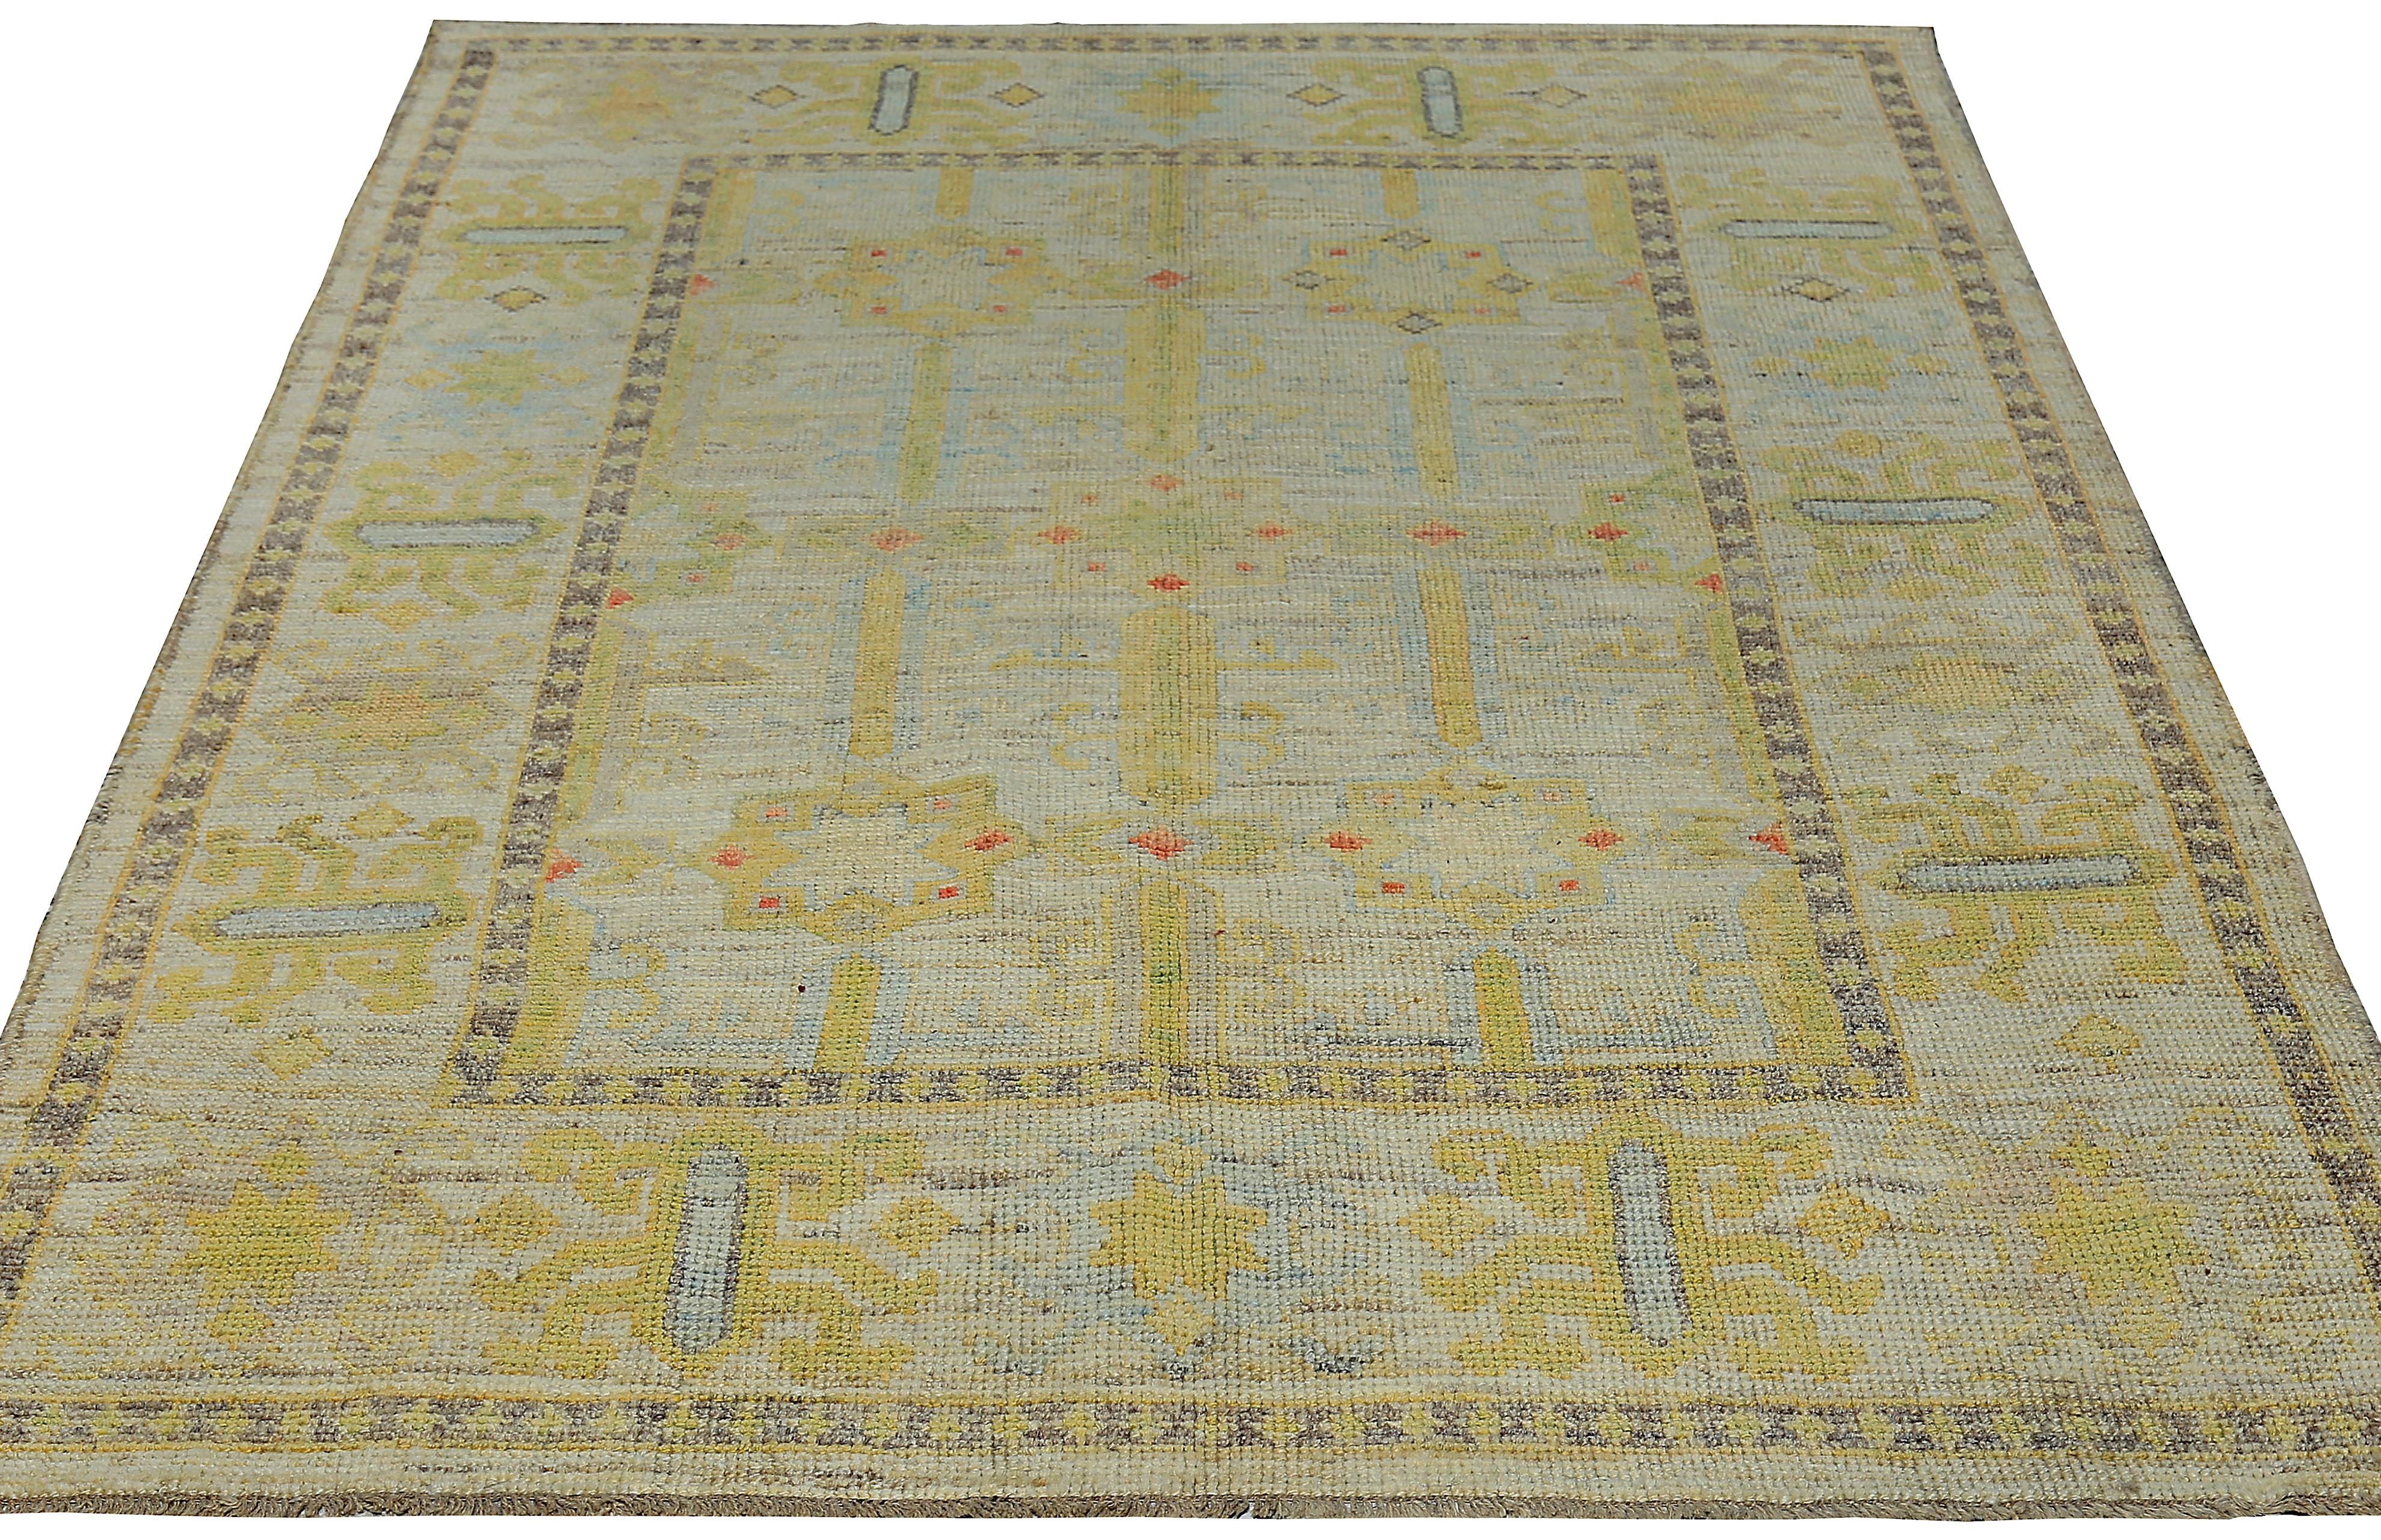 Contemporary Nazmiyal Collection Geometric Modern Turkish Oushak Rug 5 ft 2 in x 6 ft 8 in